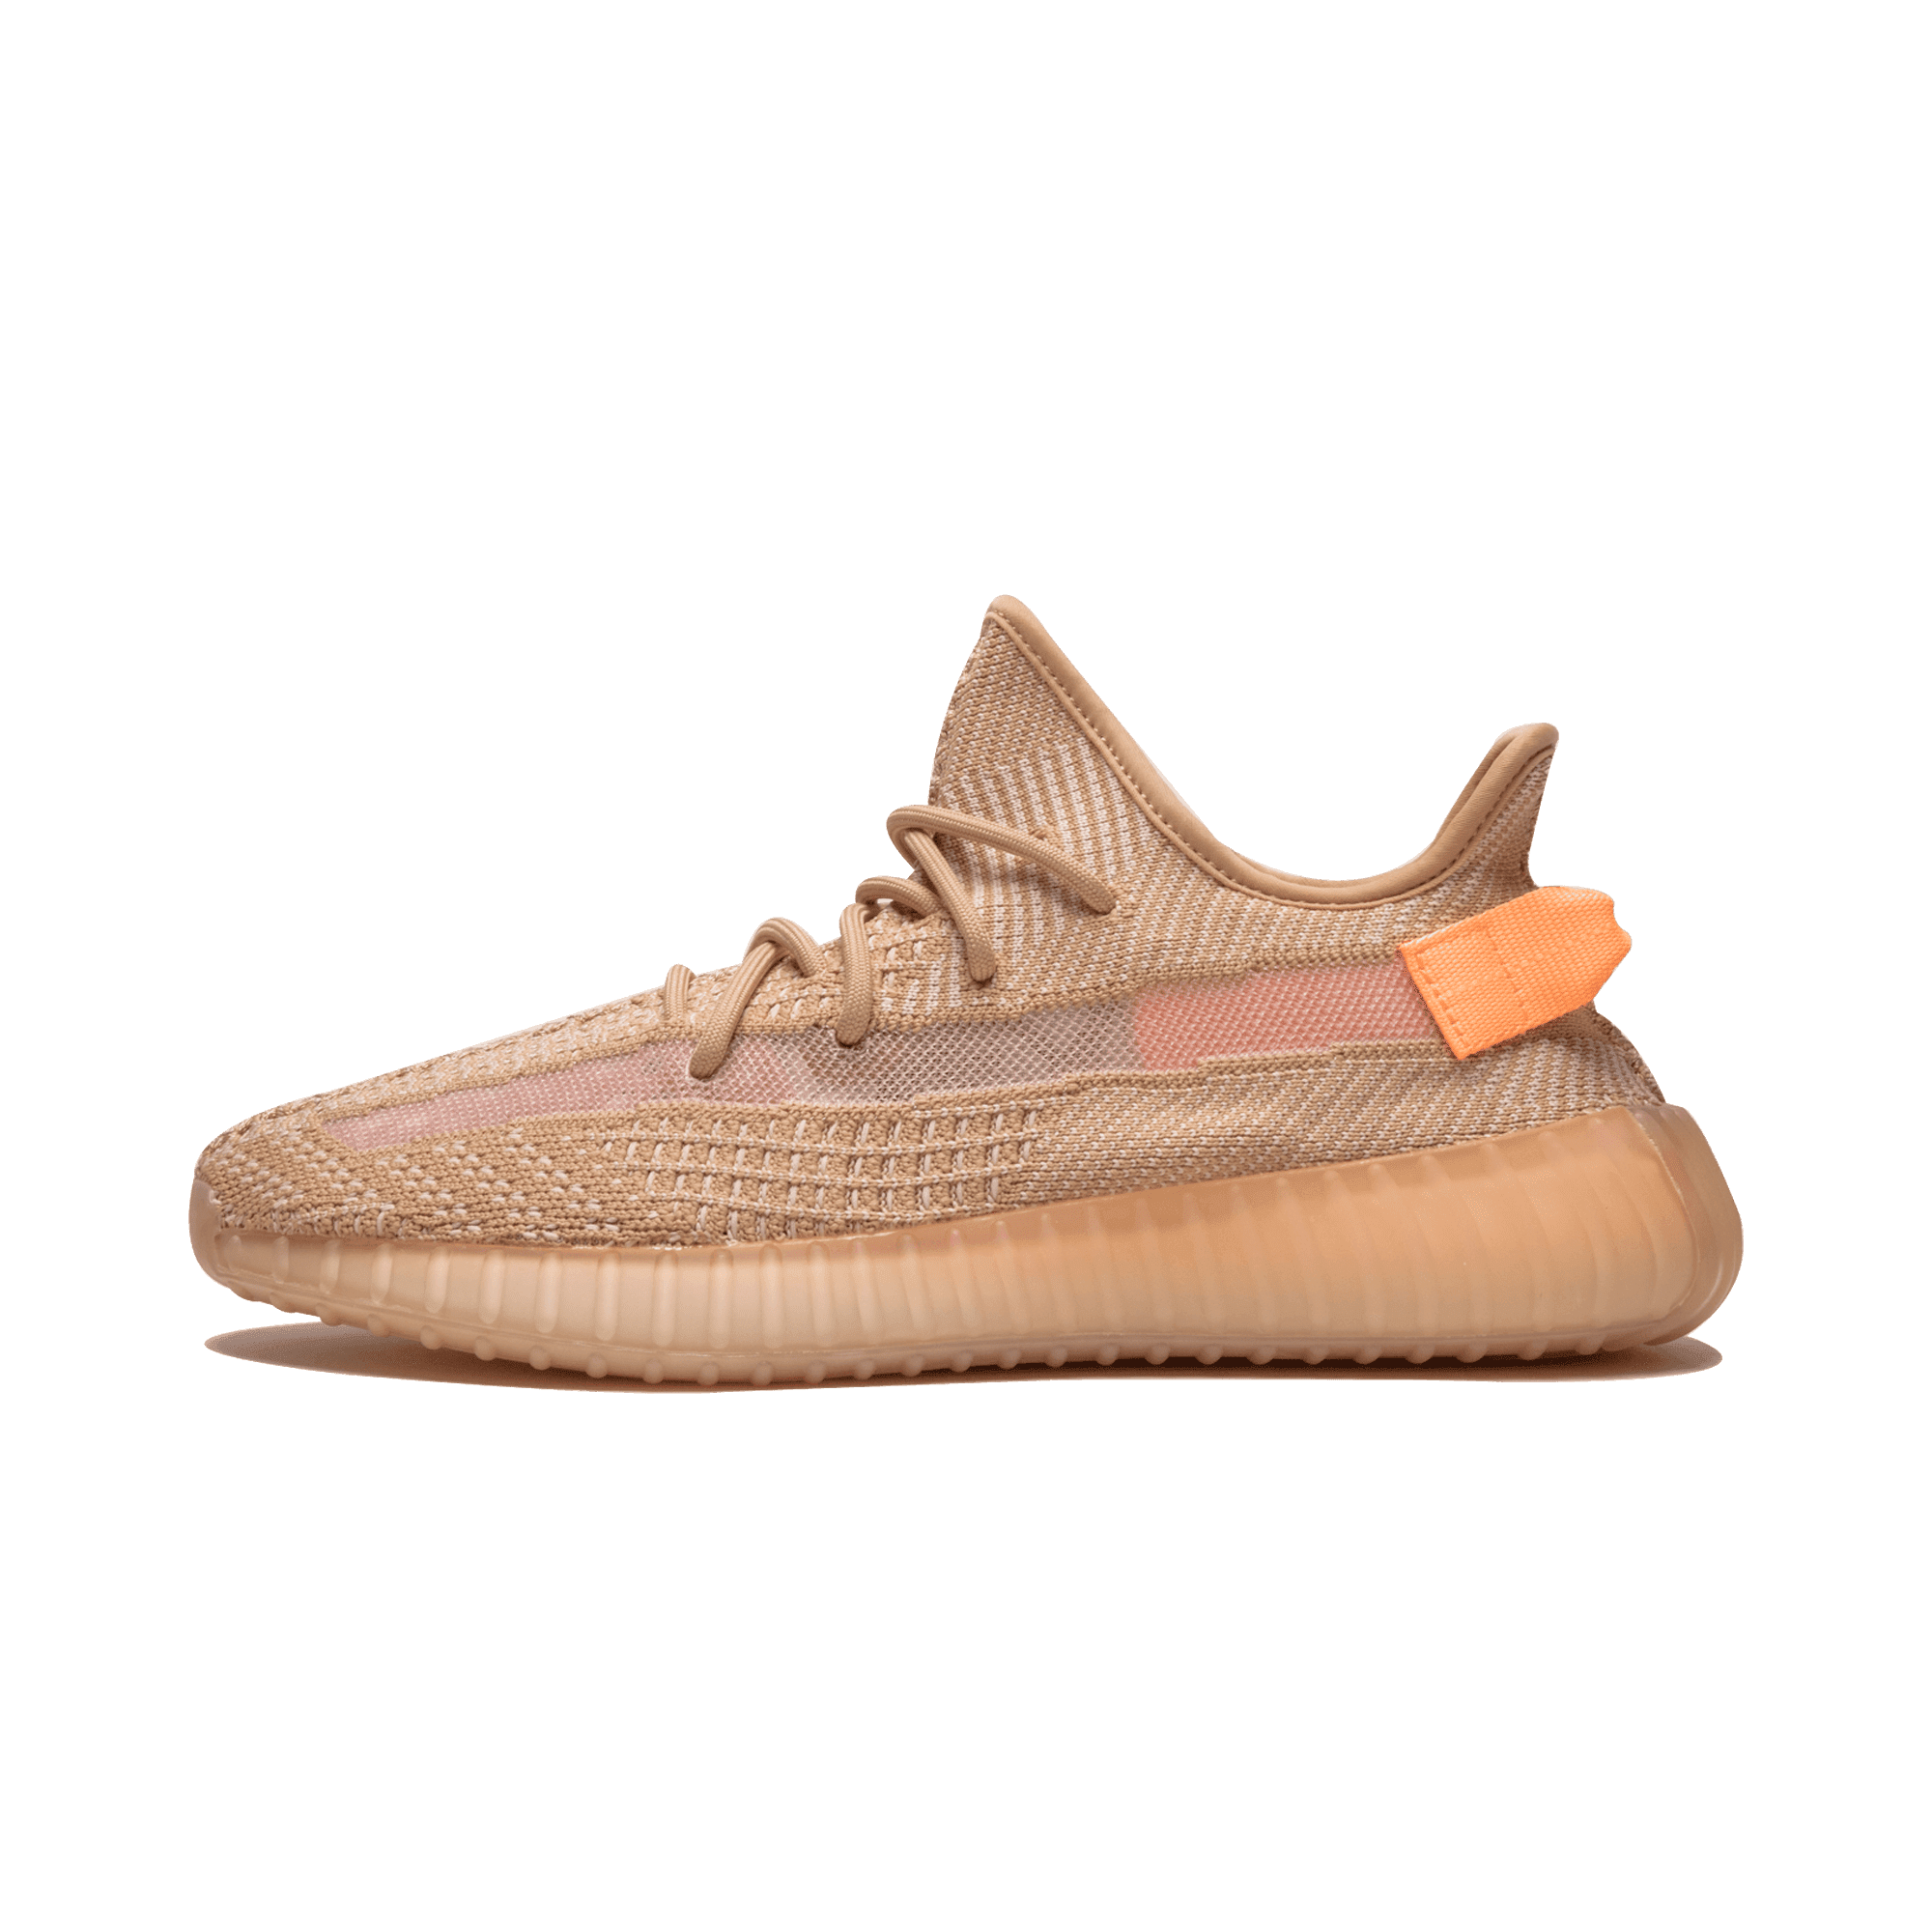 YEEZY BOOST 350 V2 "CLAY" (4005108809800)